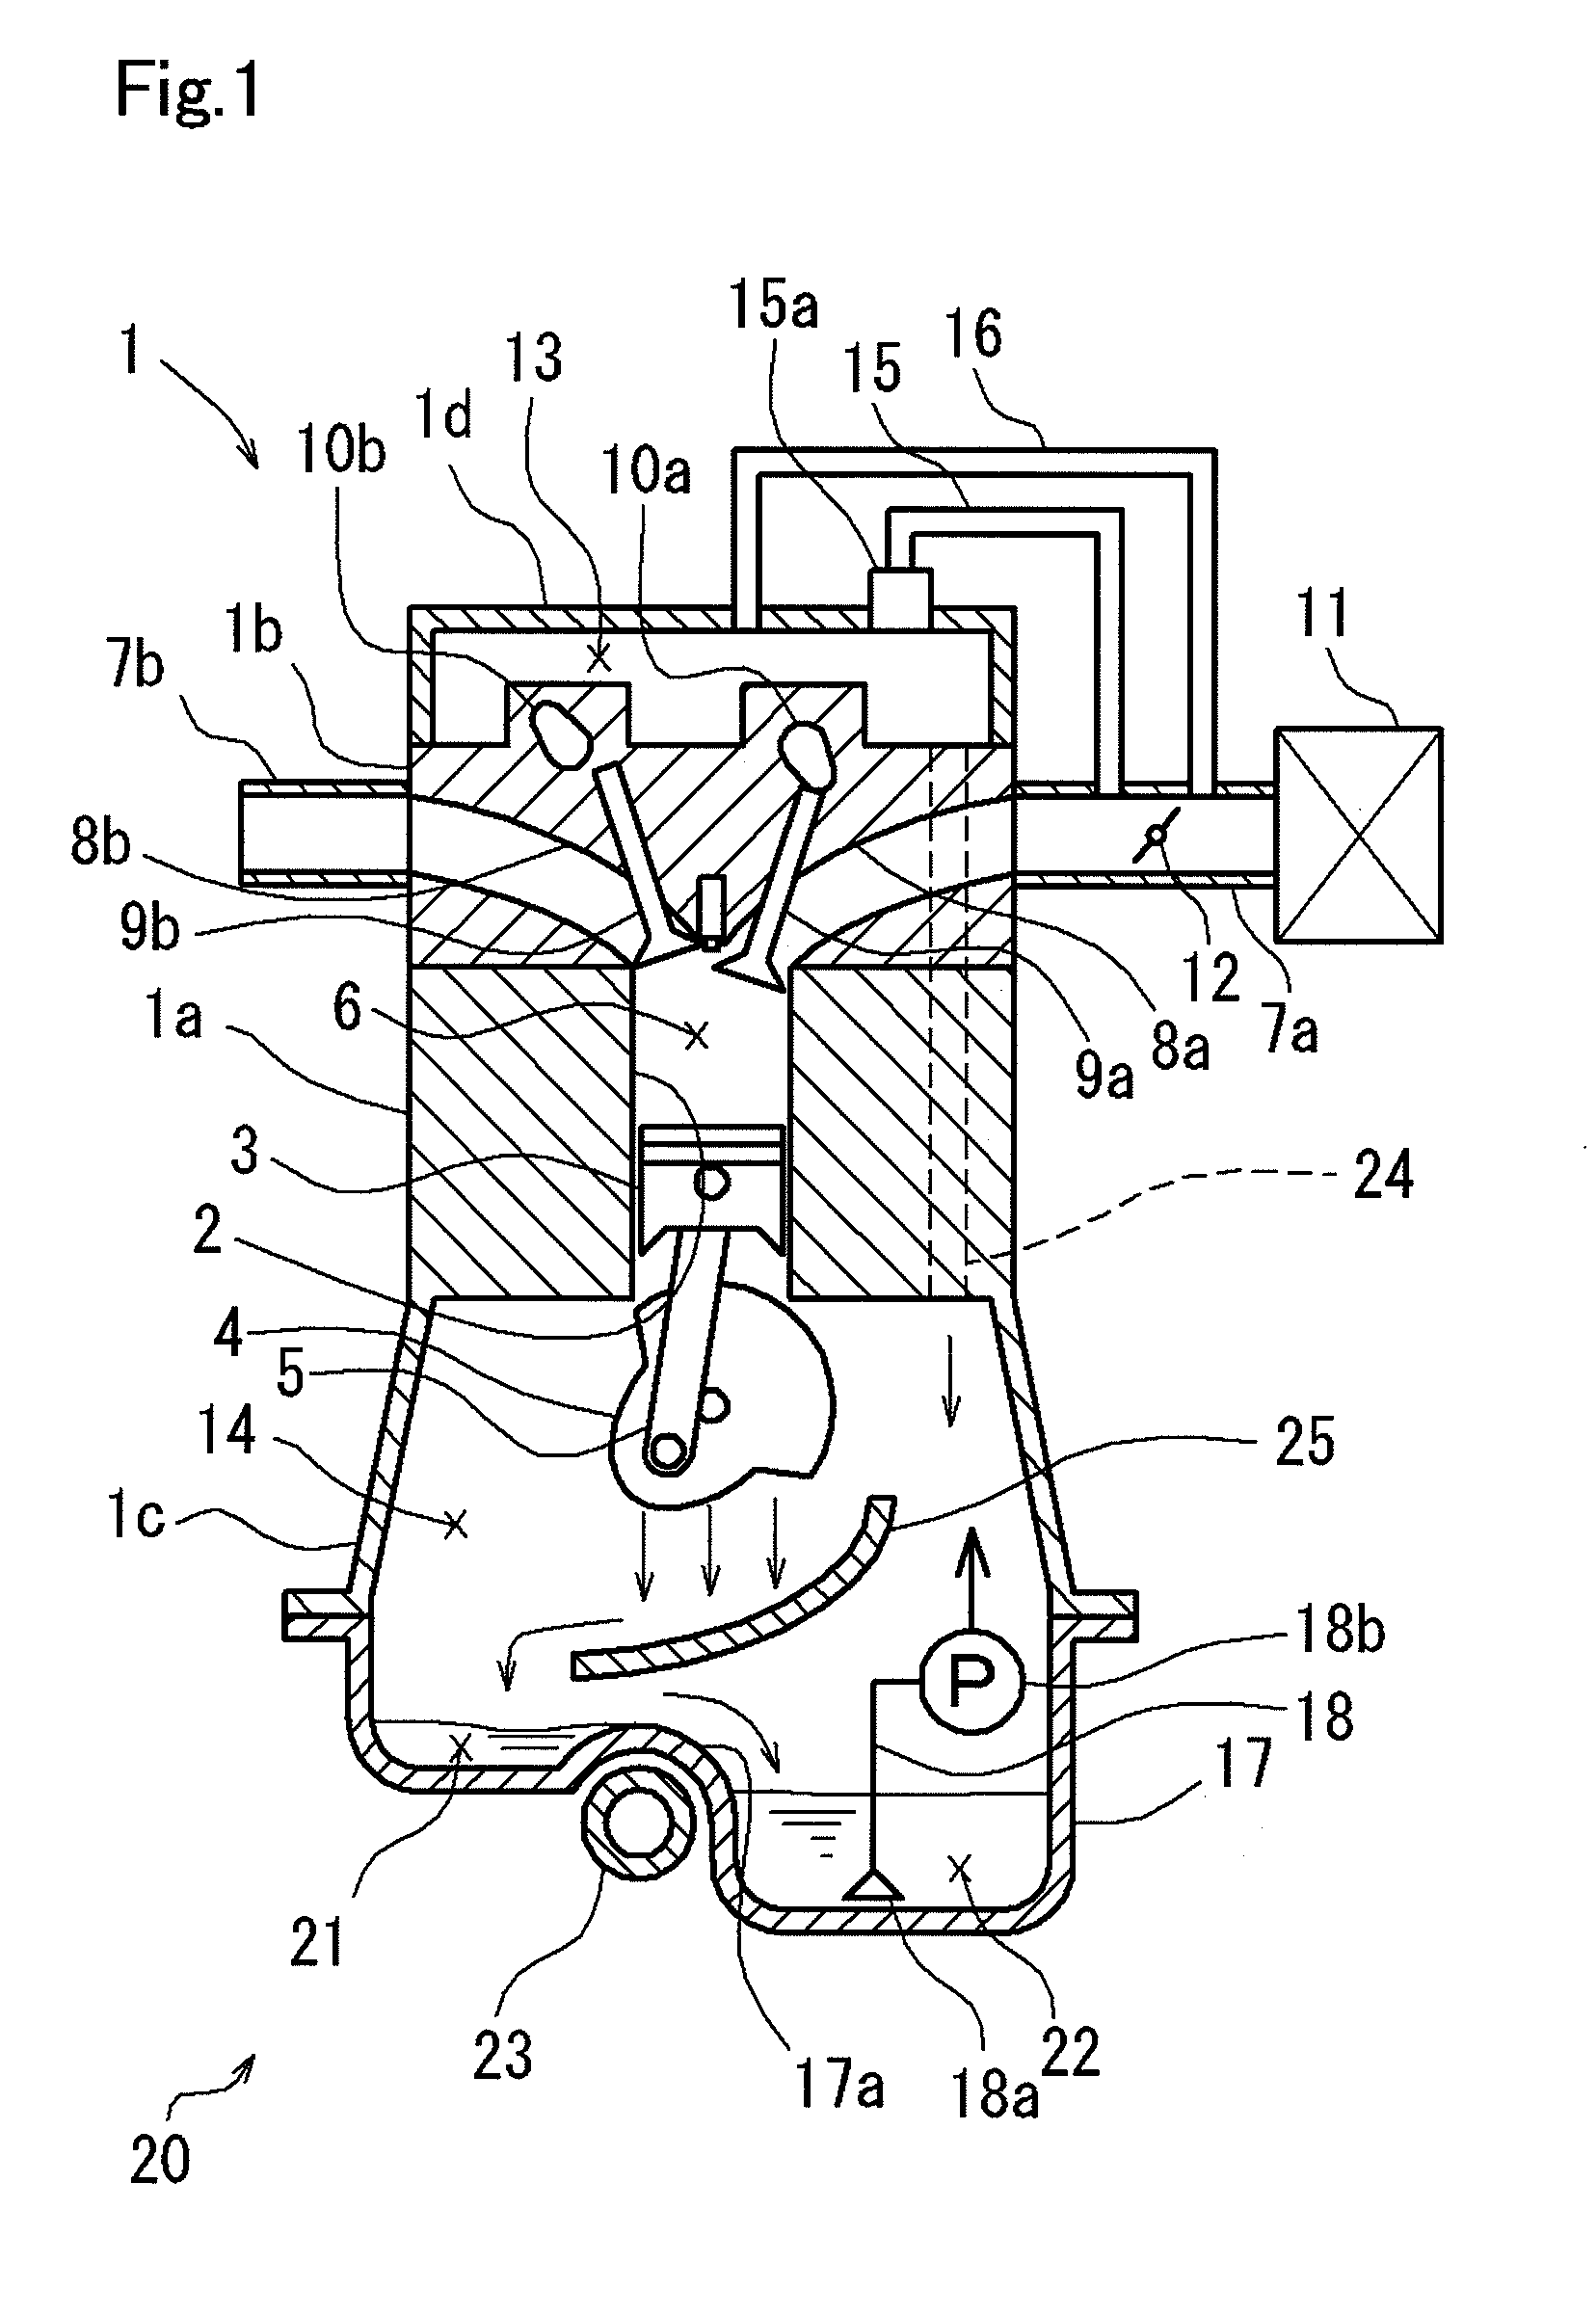 Diluting fuel-in-oil separating apparatus of internal combustion engine